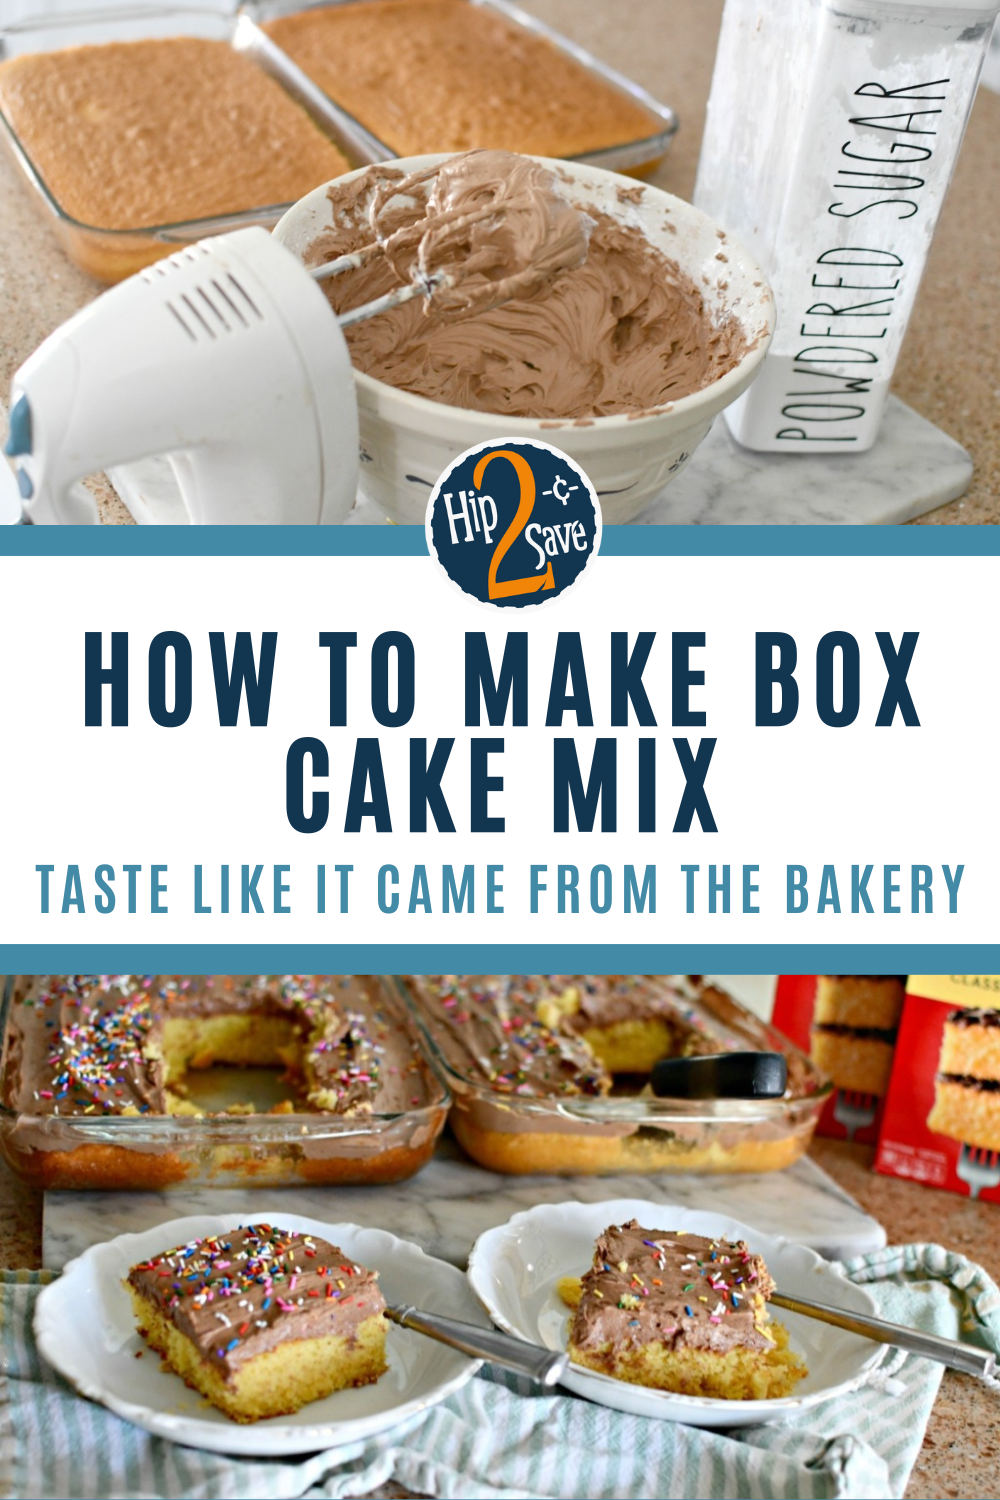 The History of Boxed Cake Mix